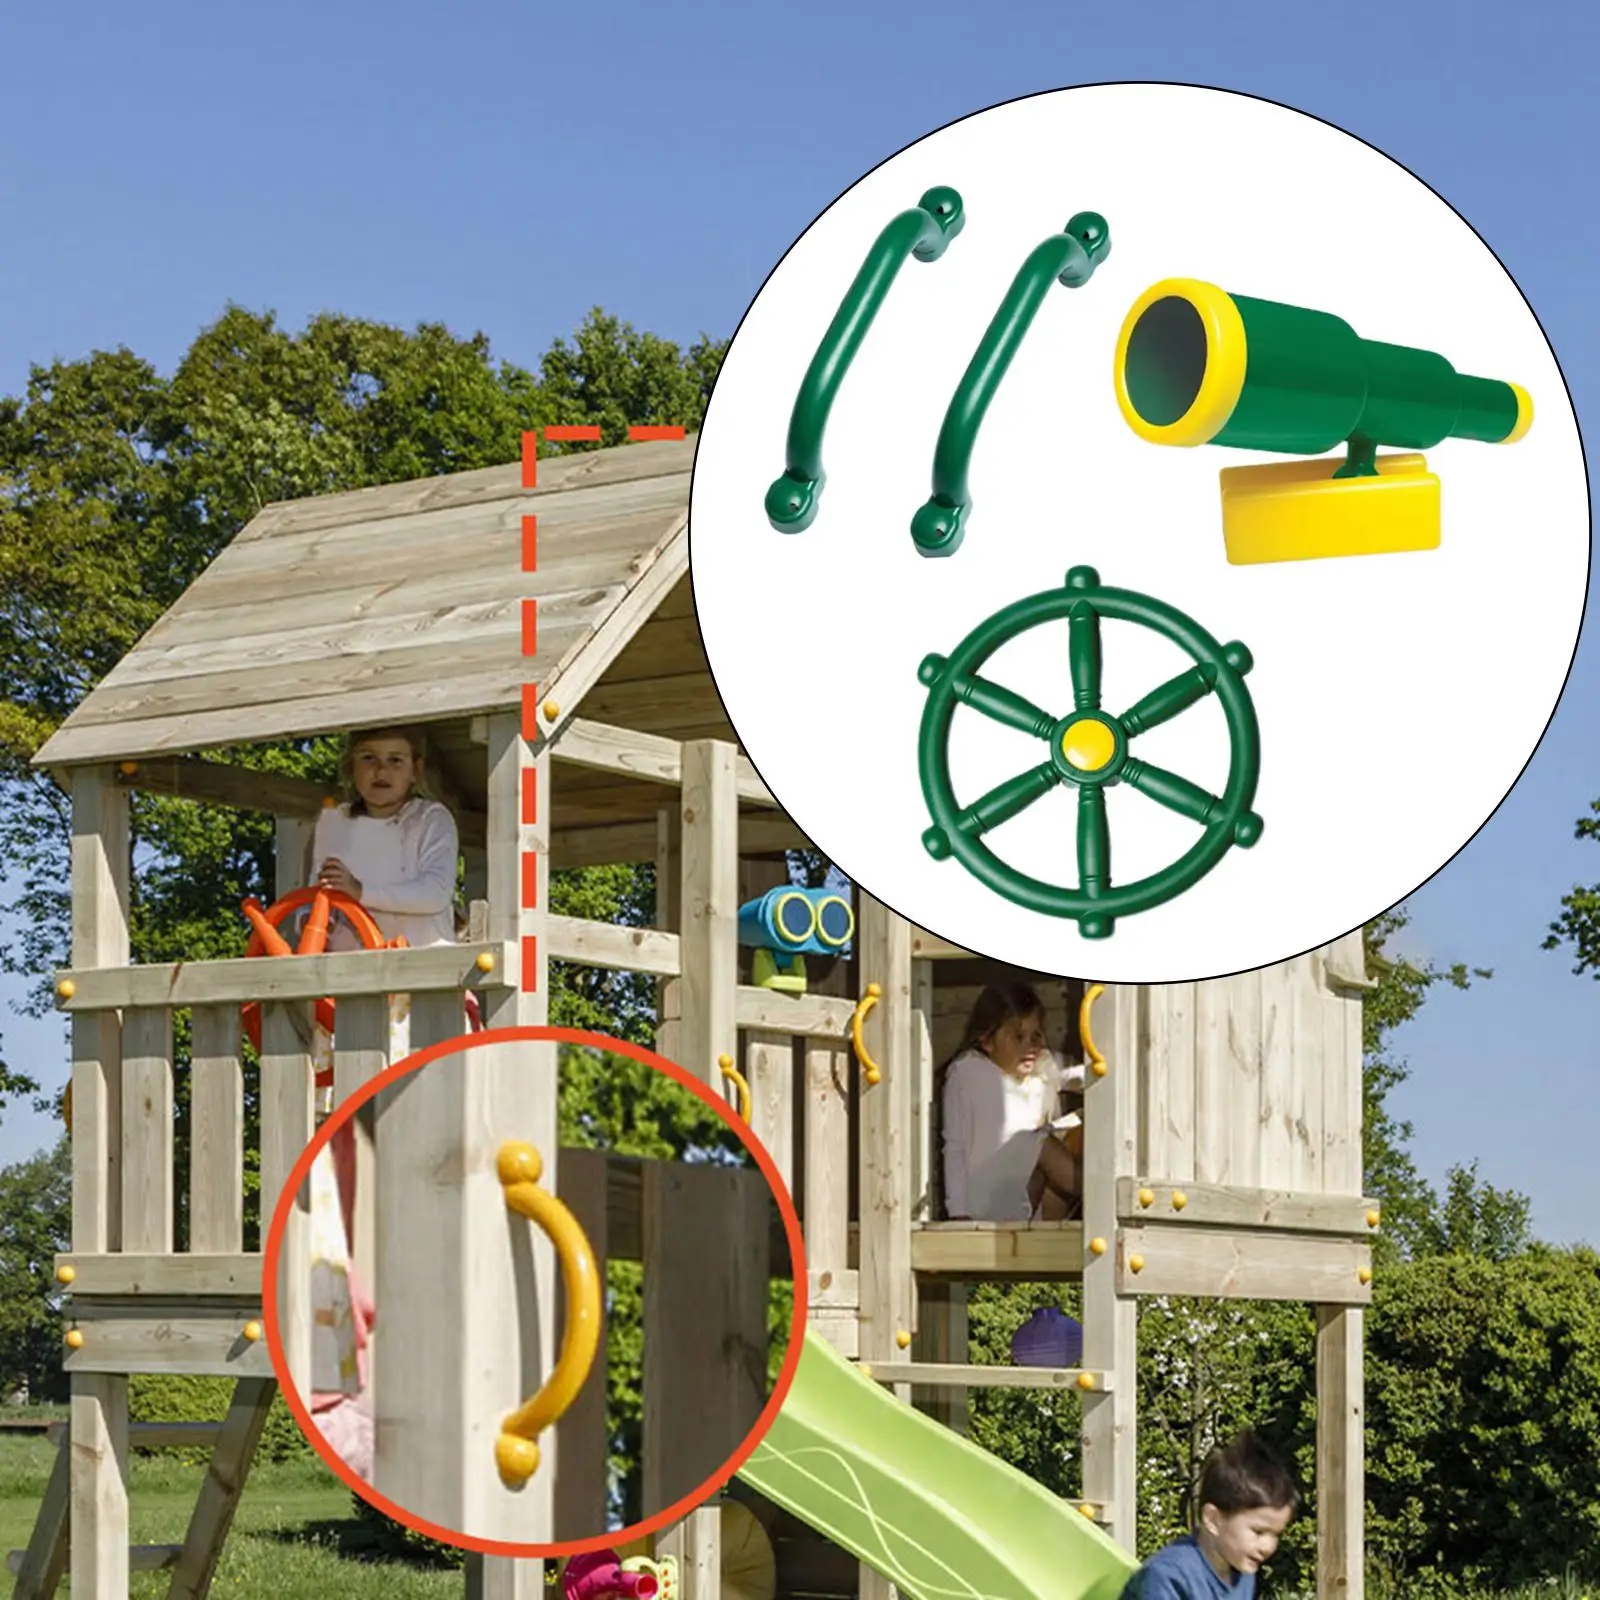 4x Playground Equipment Set Active Outdoor Play Kids Pirate Telescope Steering Wheel & Safety Handle Bars for Gym Boys & Girls